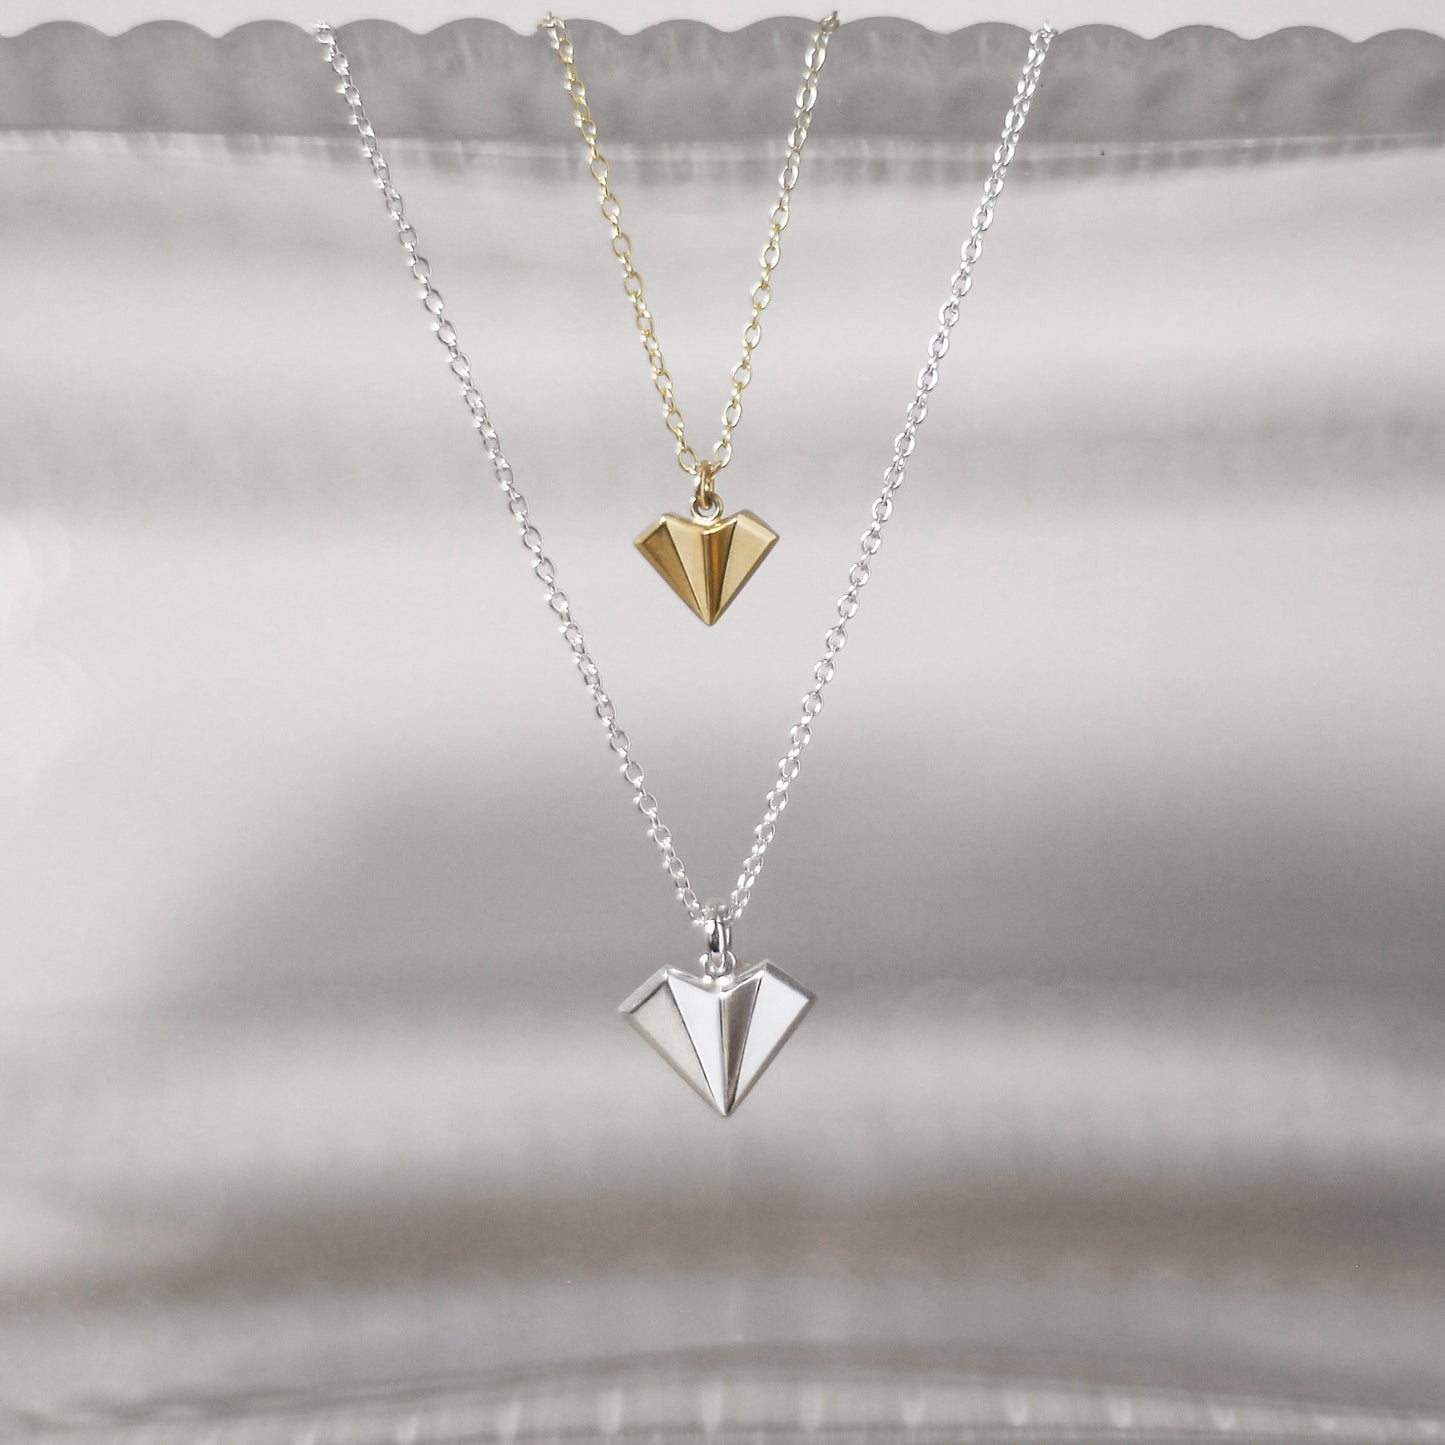 Geometric Heart Necklace - Gold